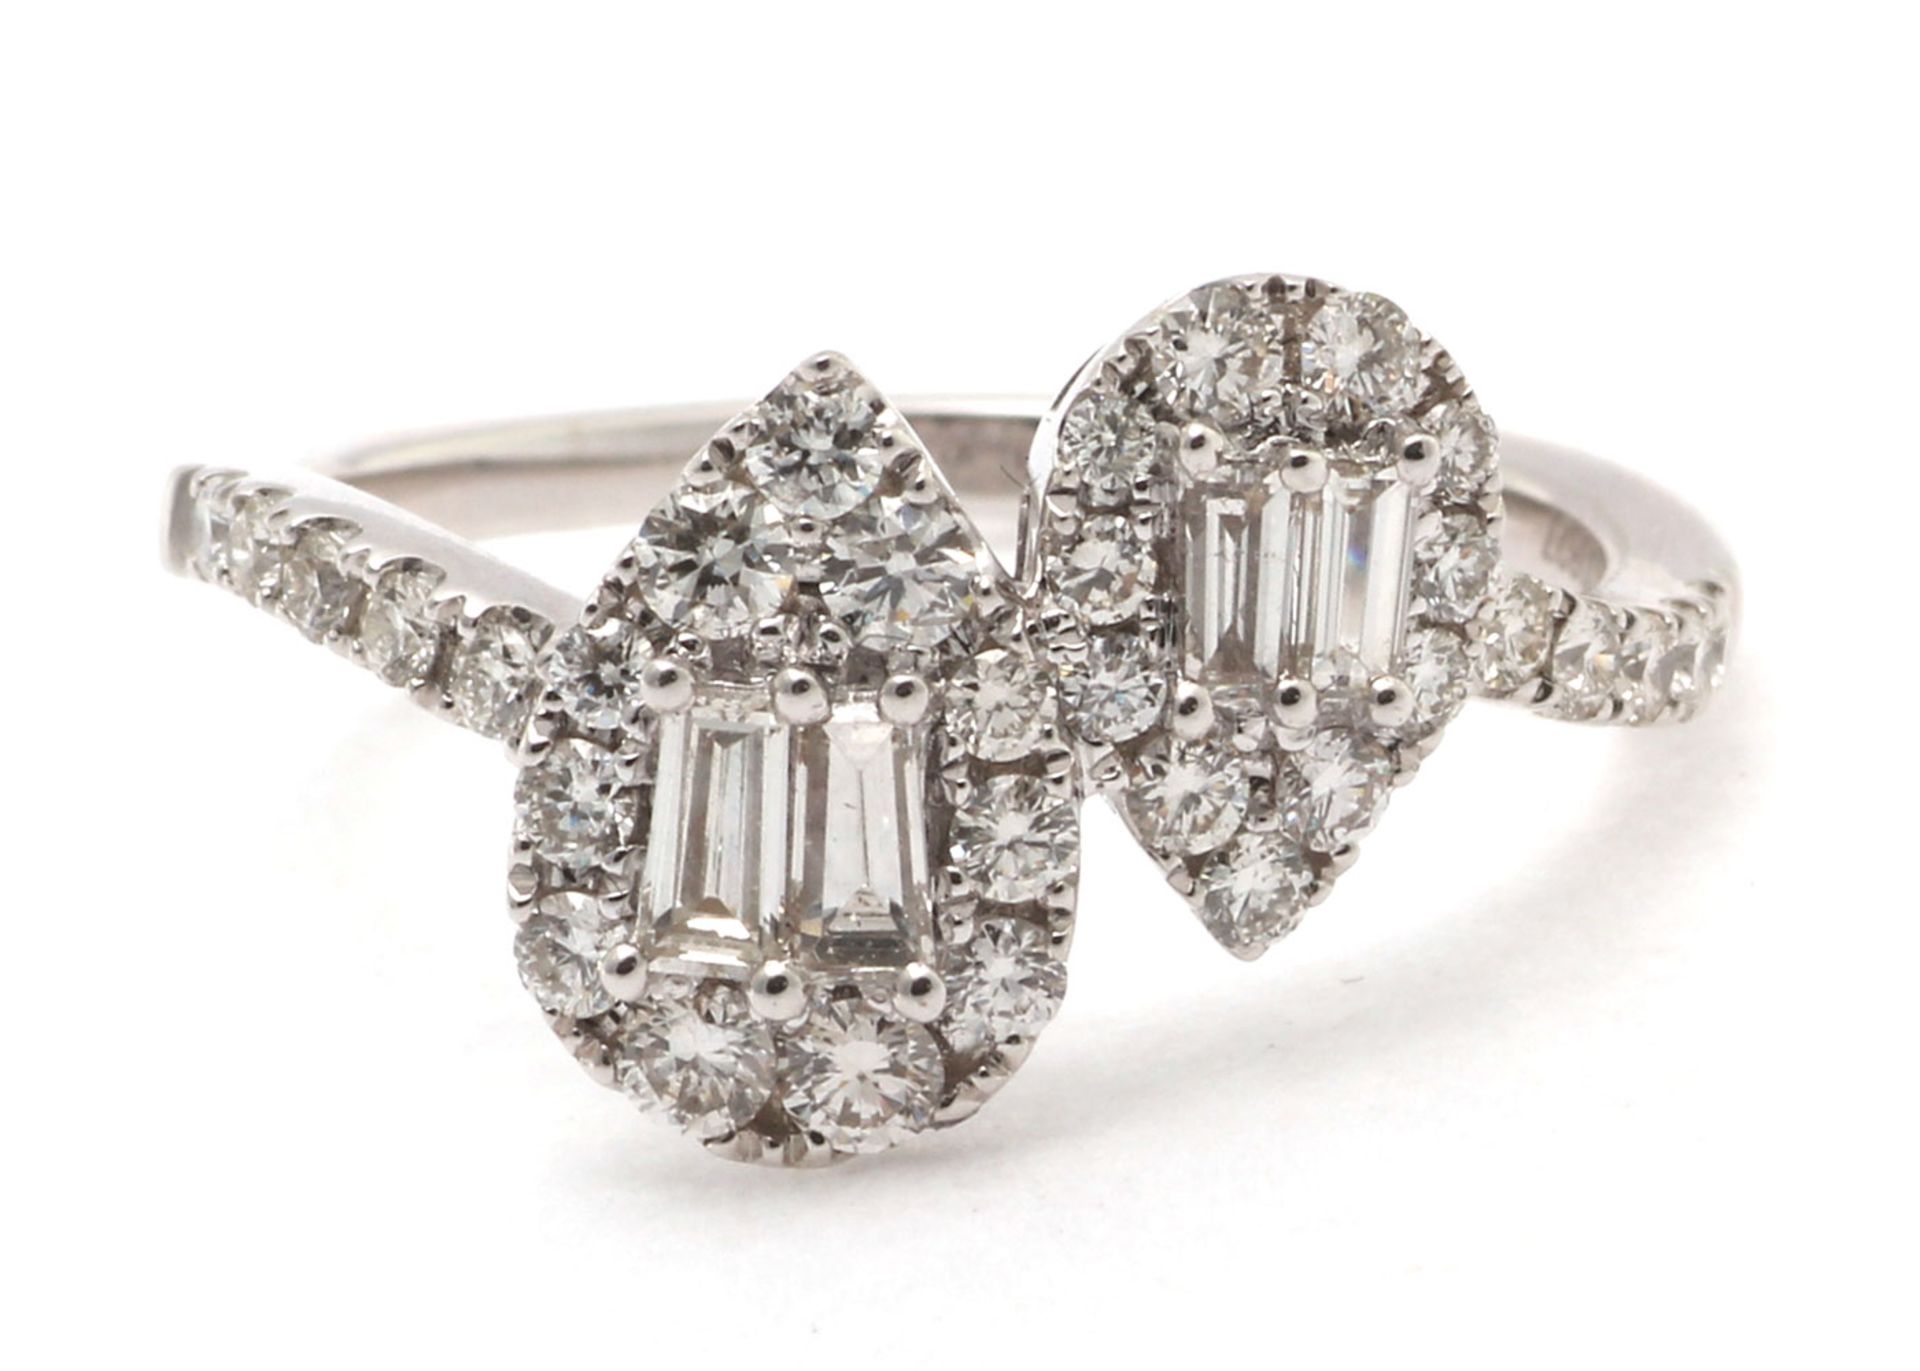 Valued by GIE £12,955.00 - 18ct White Gold Double Pear Shape Cluster Diamond Ring 0.83 Carats -